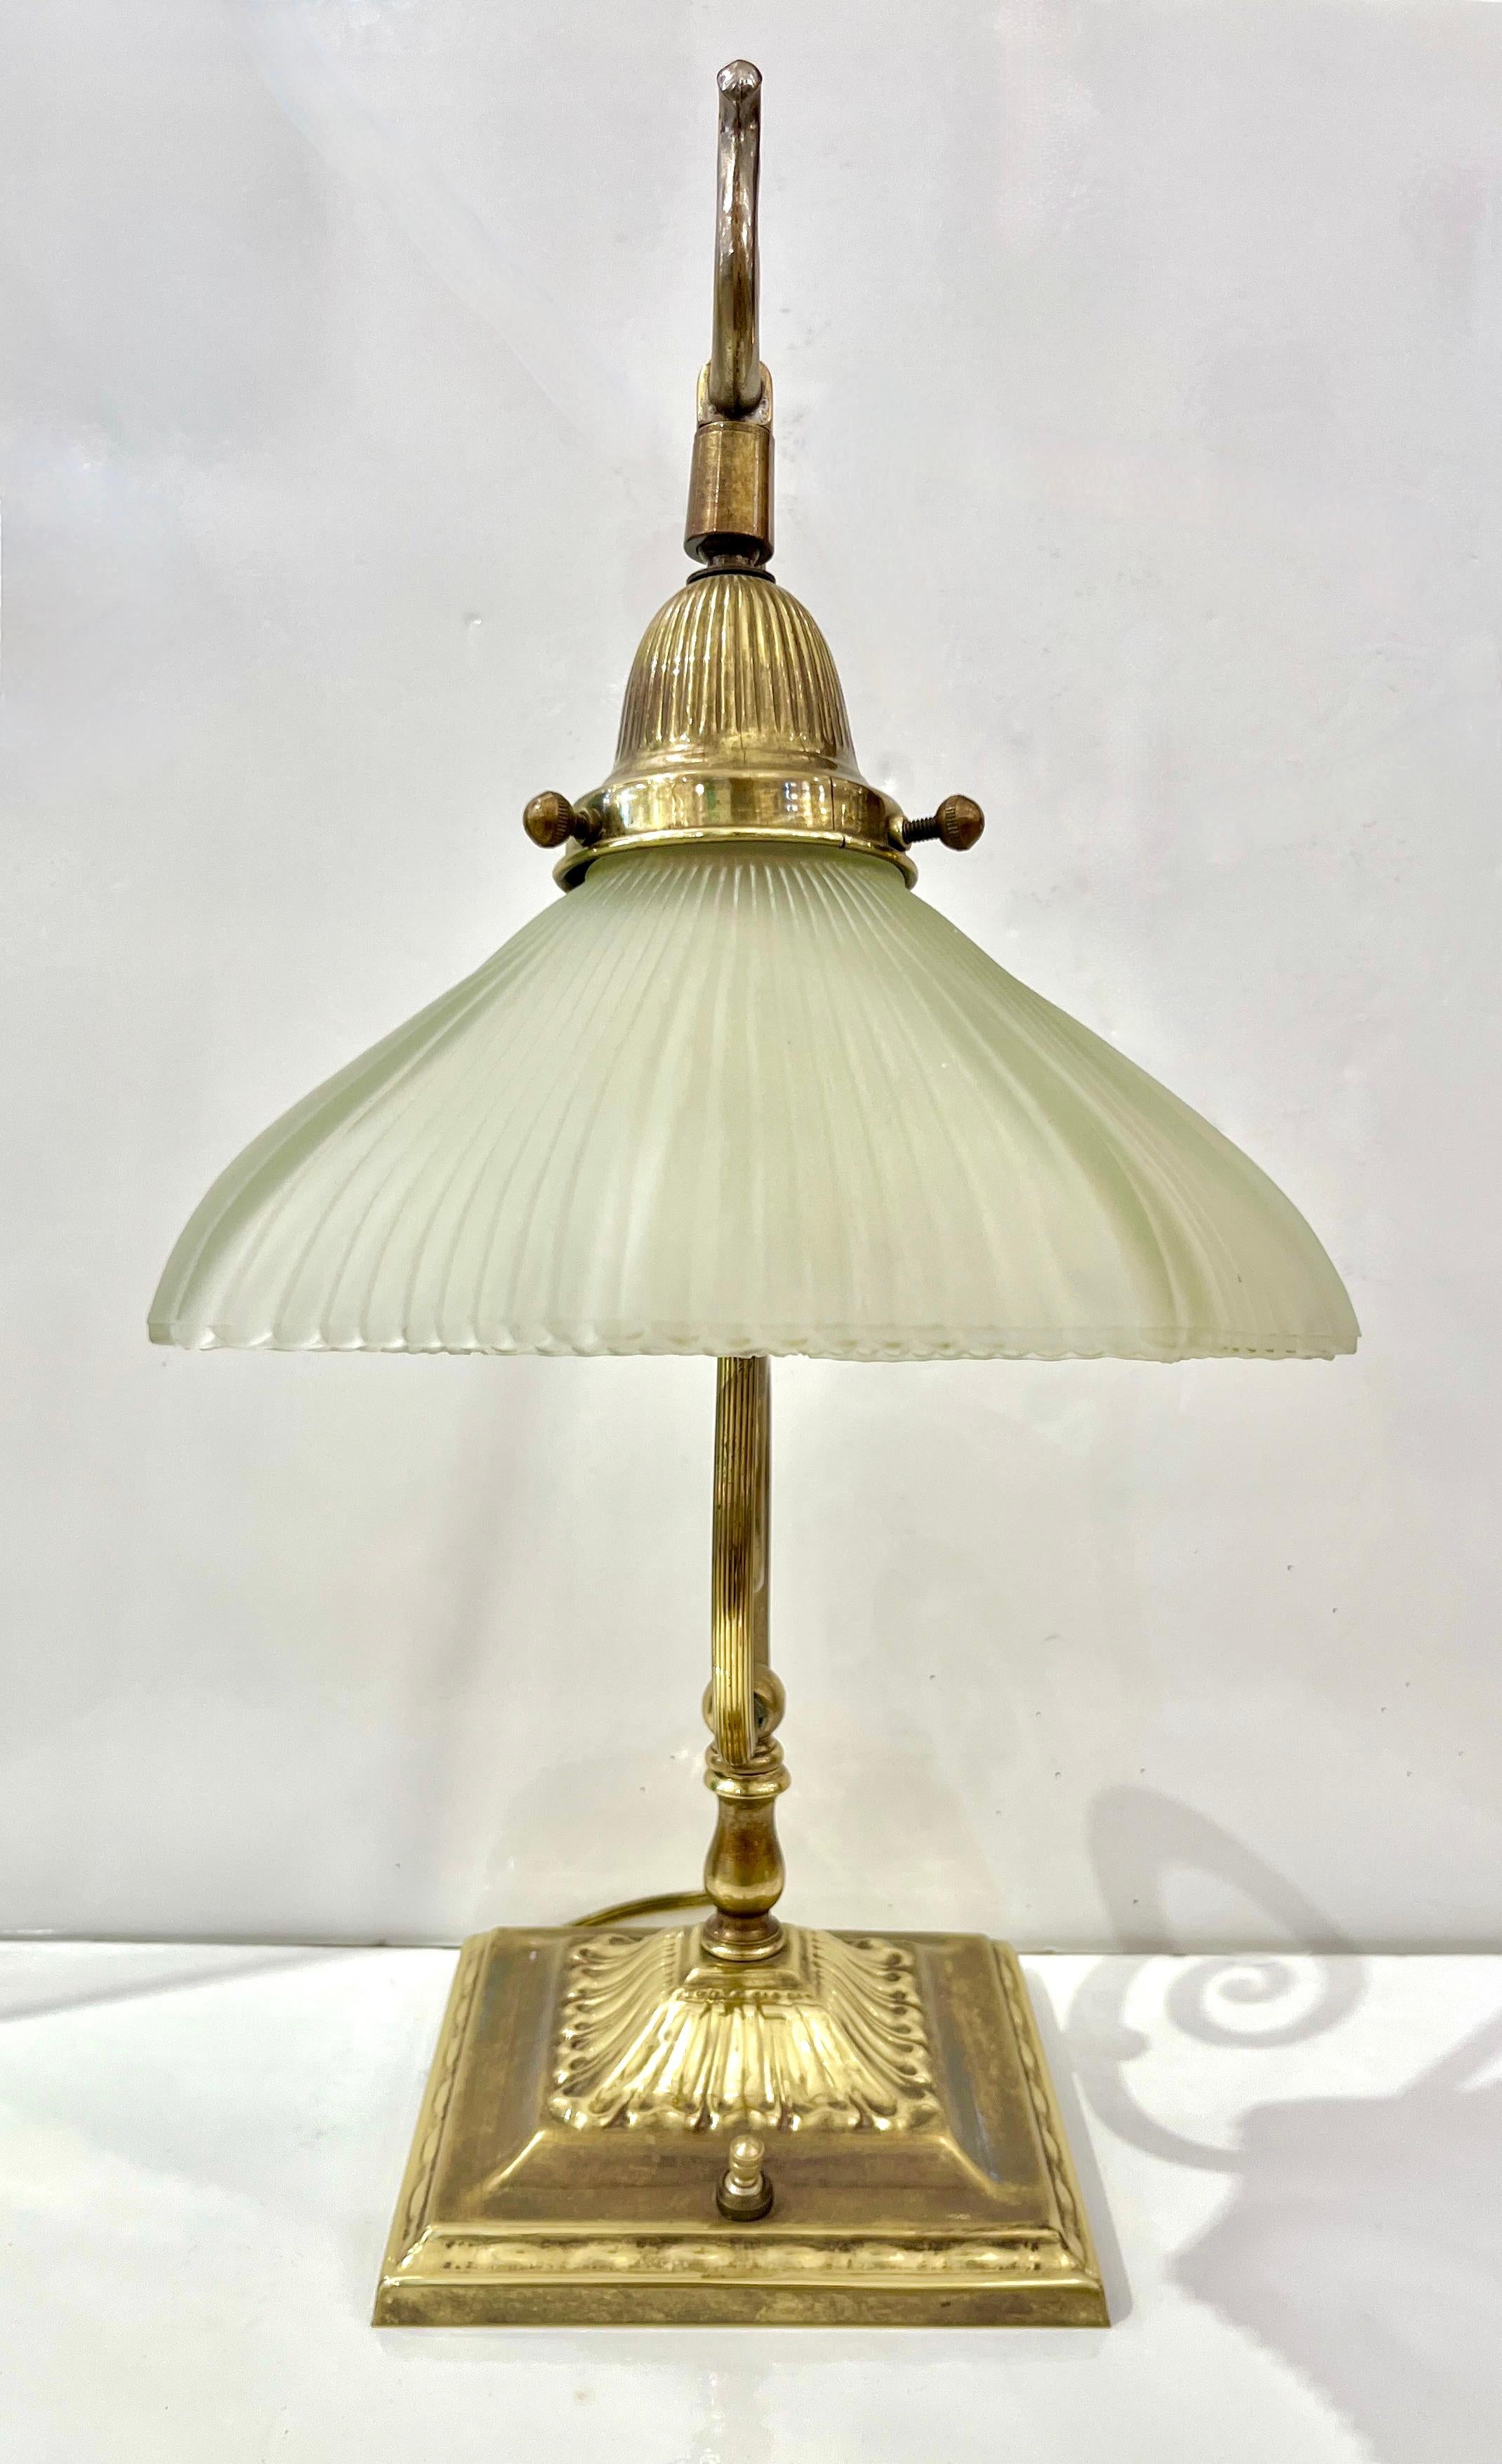 1950s American Art Deco Style Brass Table/Desk Lamp with Satin White Glass Shade For Sale 1